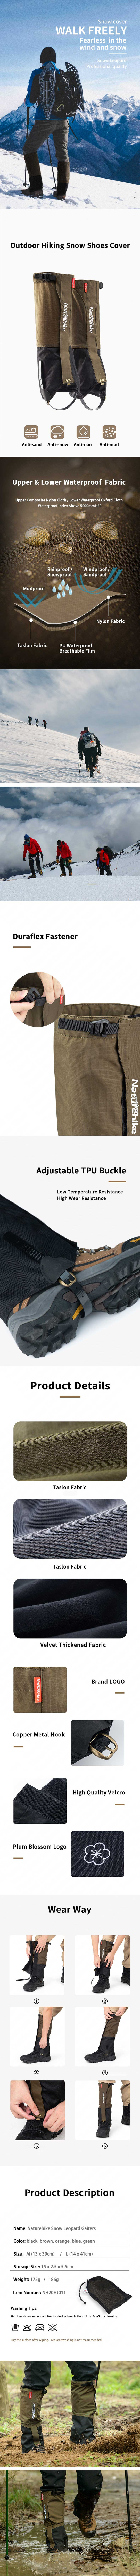 Outdoor Shoes hiking skiing snow climbing